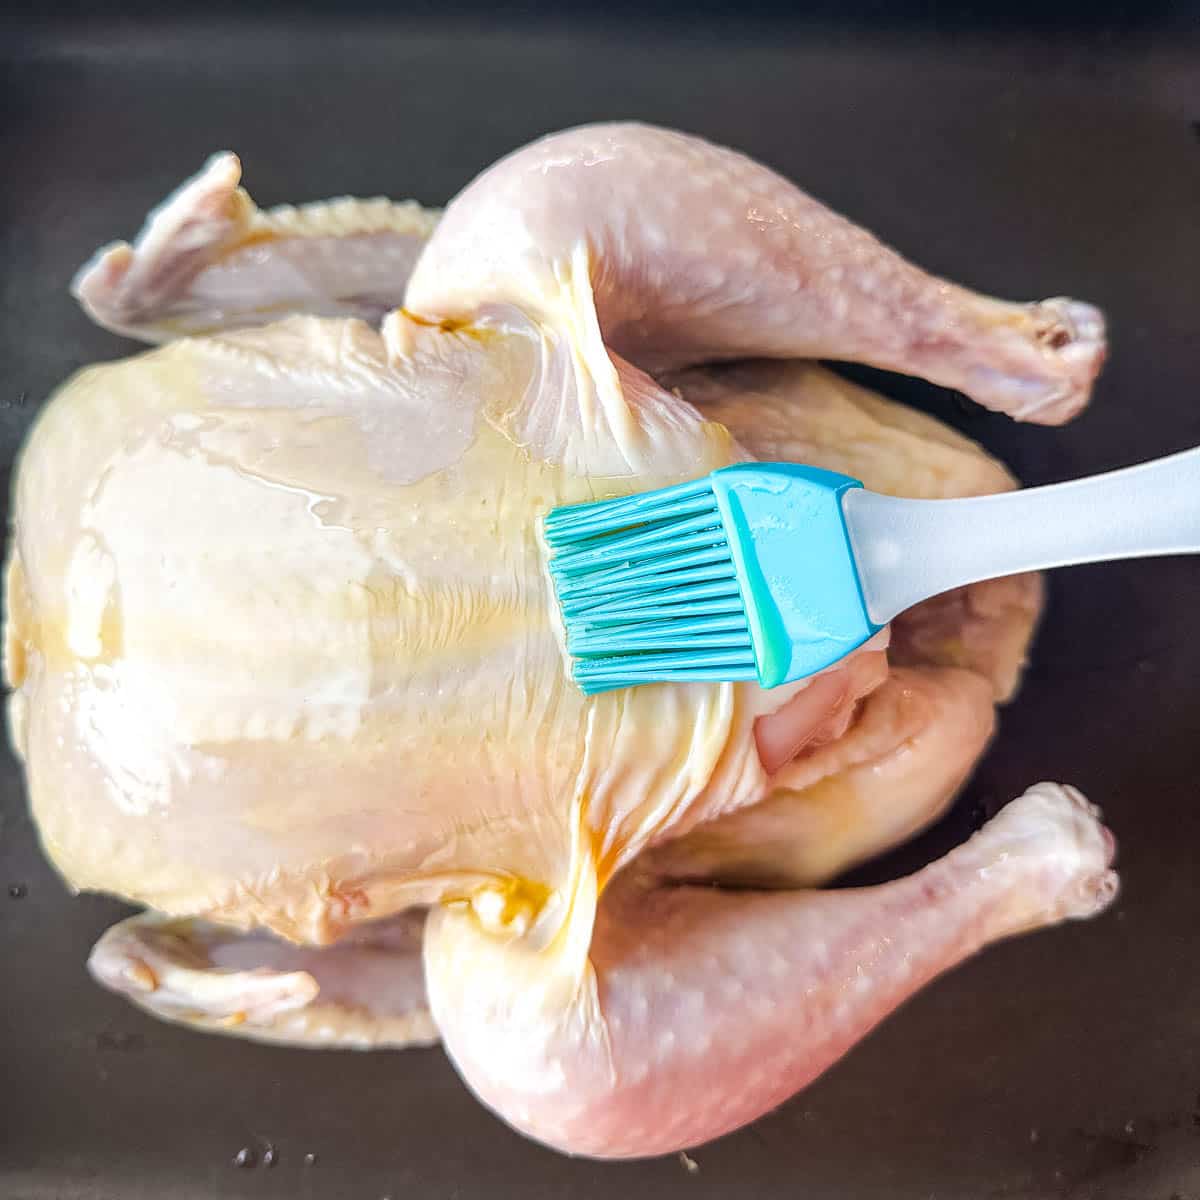 A blue brush is used to brush olive oil on a chicken in a pan.